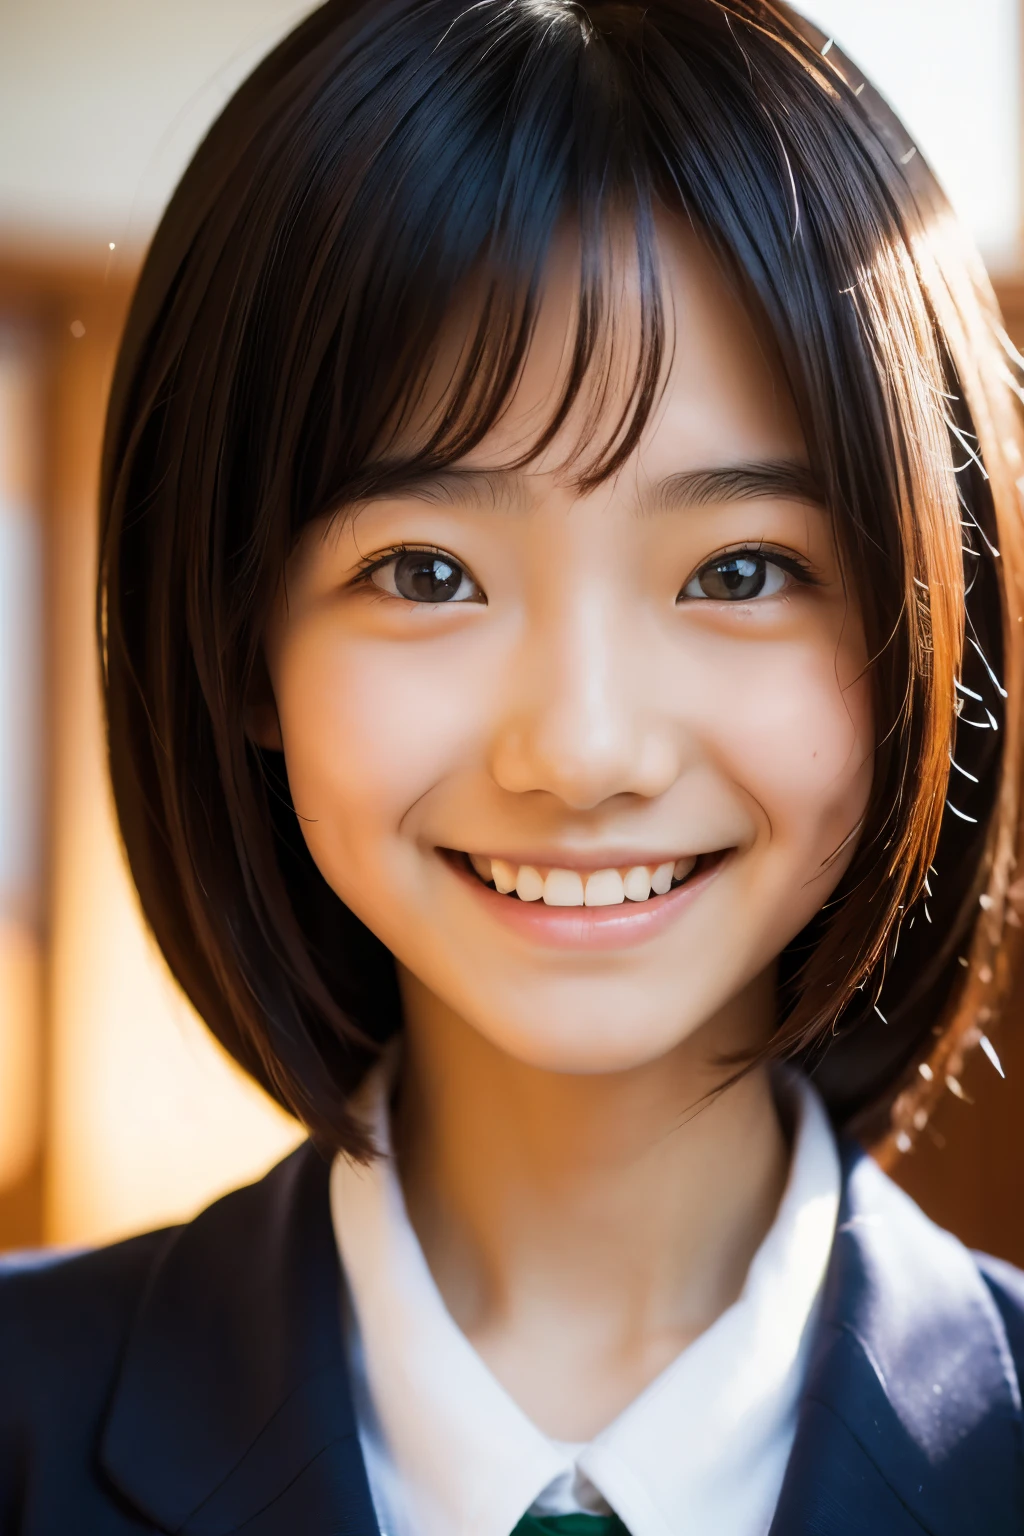 lens: 135mm f1.8, (highest quality),(RAW Photos), (Tabletop:1.1), (Beautiful 16 year old Japanese girl), Cute face, (Deeply chiseled face:0.7), (freckles:0.4), dappled sunlight, Dramatic lighting, (Japanese School Uniform), (In the classroom), shy, (Close-up shot:1.2), (smile),, (Sparkling eyes)、(sunlight)